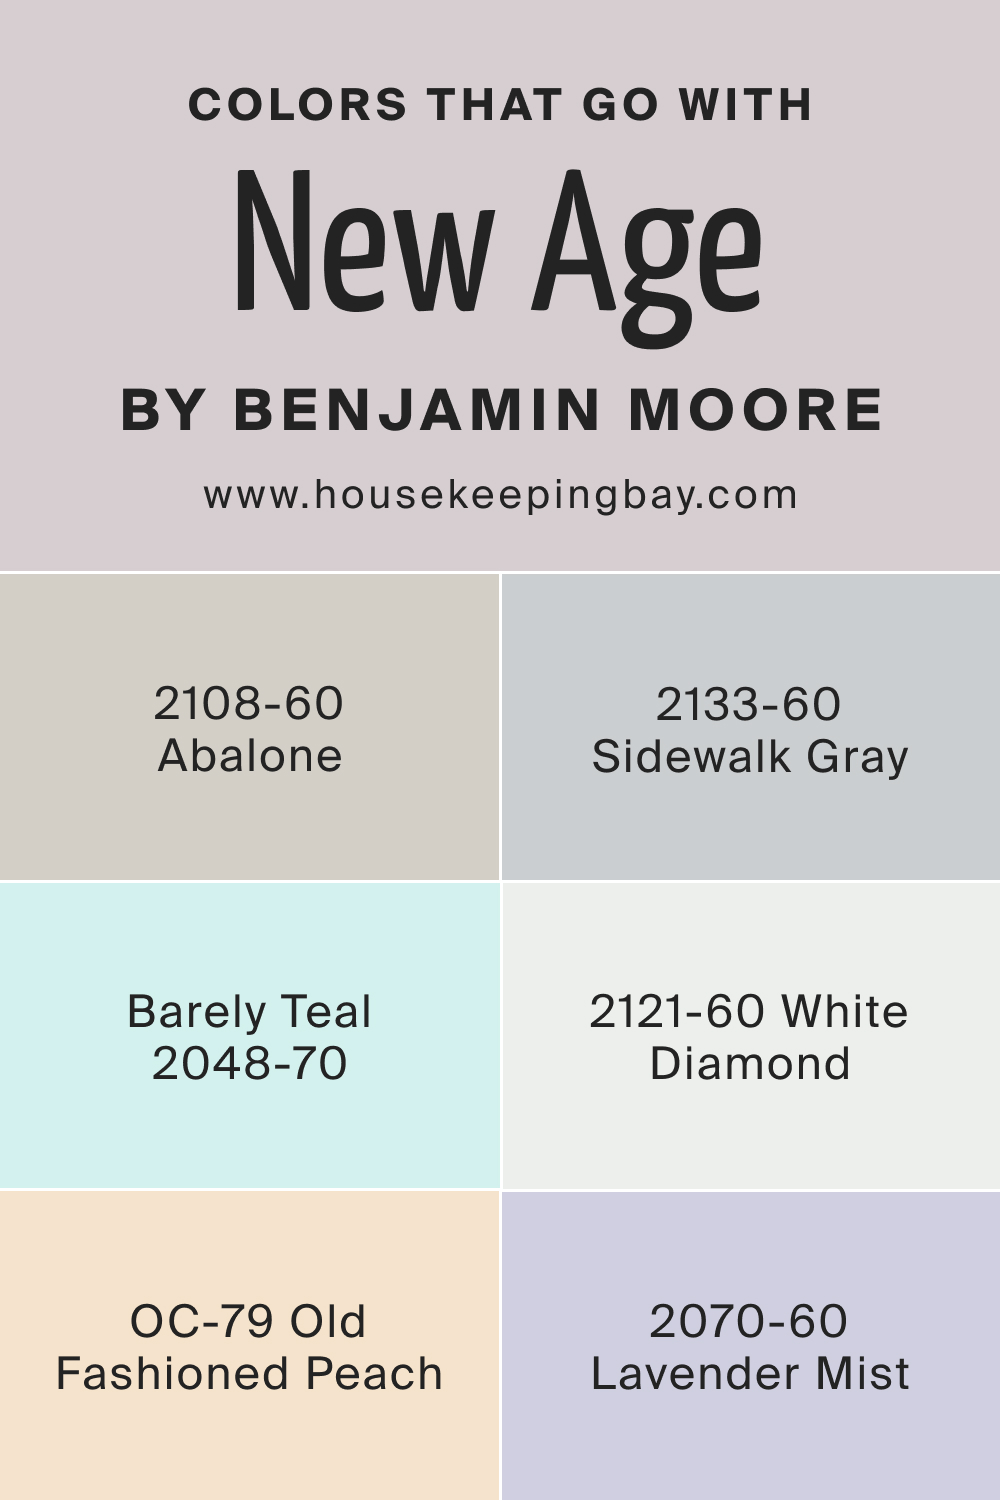 Colors that goes with New Age 1444 by Benjamin Moore